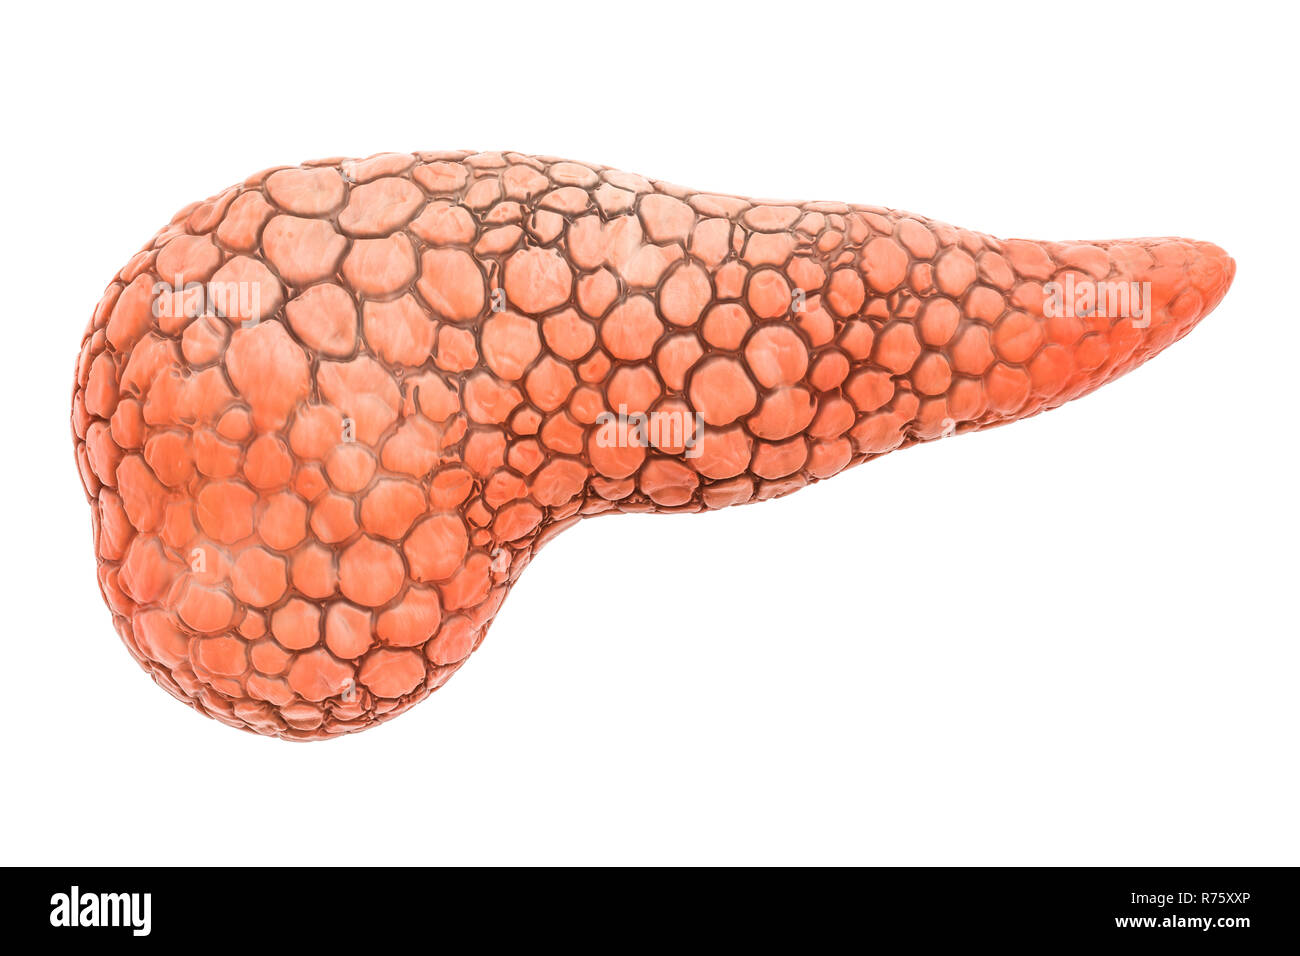 Pancreas Human Organ, 3D rendering isolated on white background Stock Photo